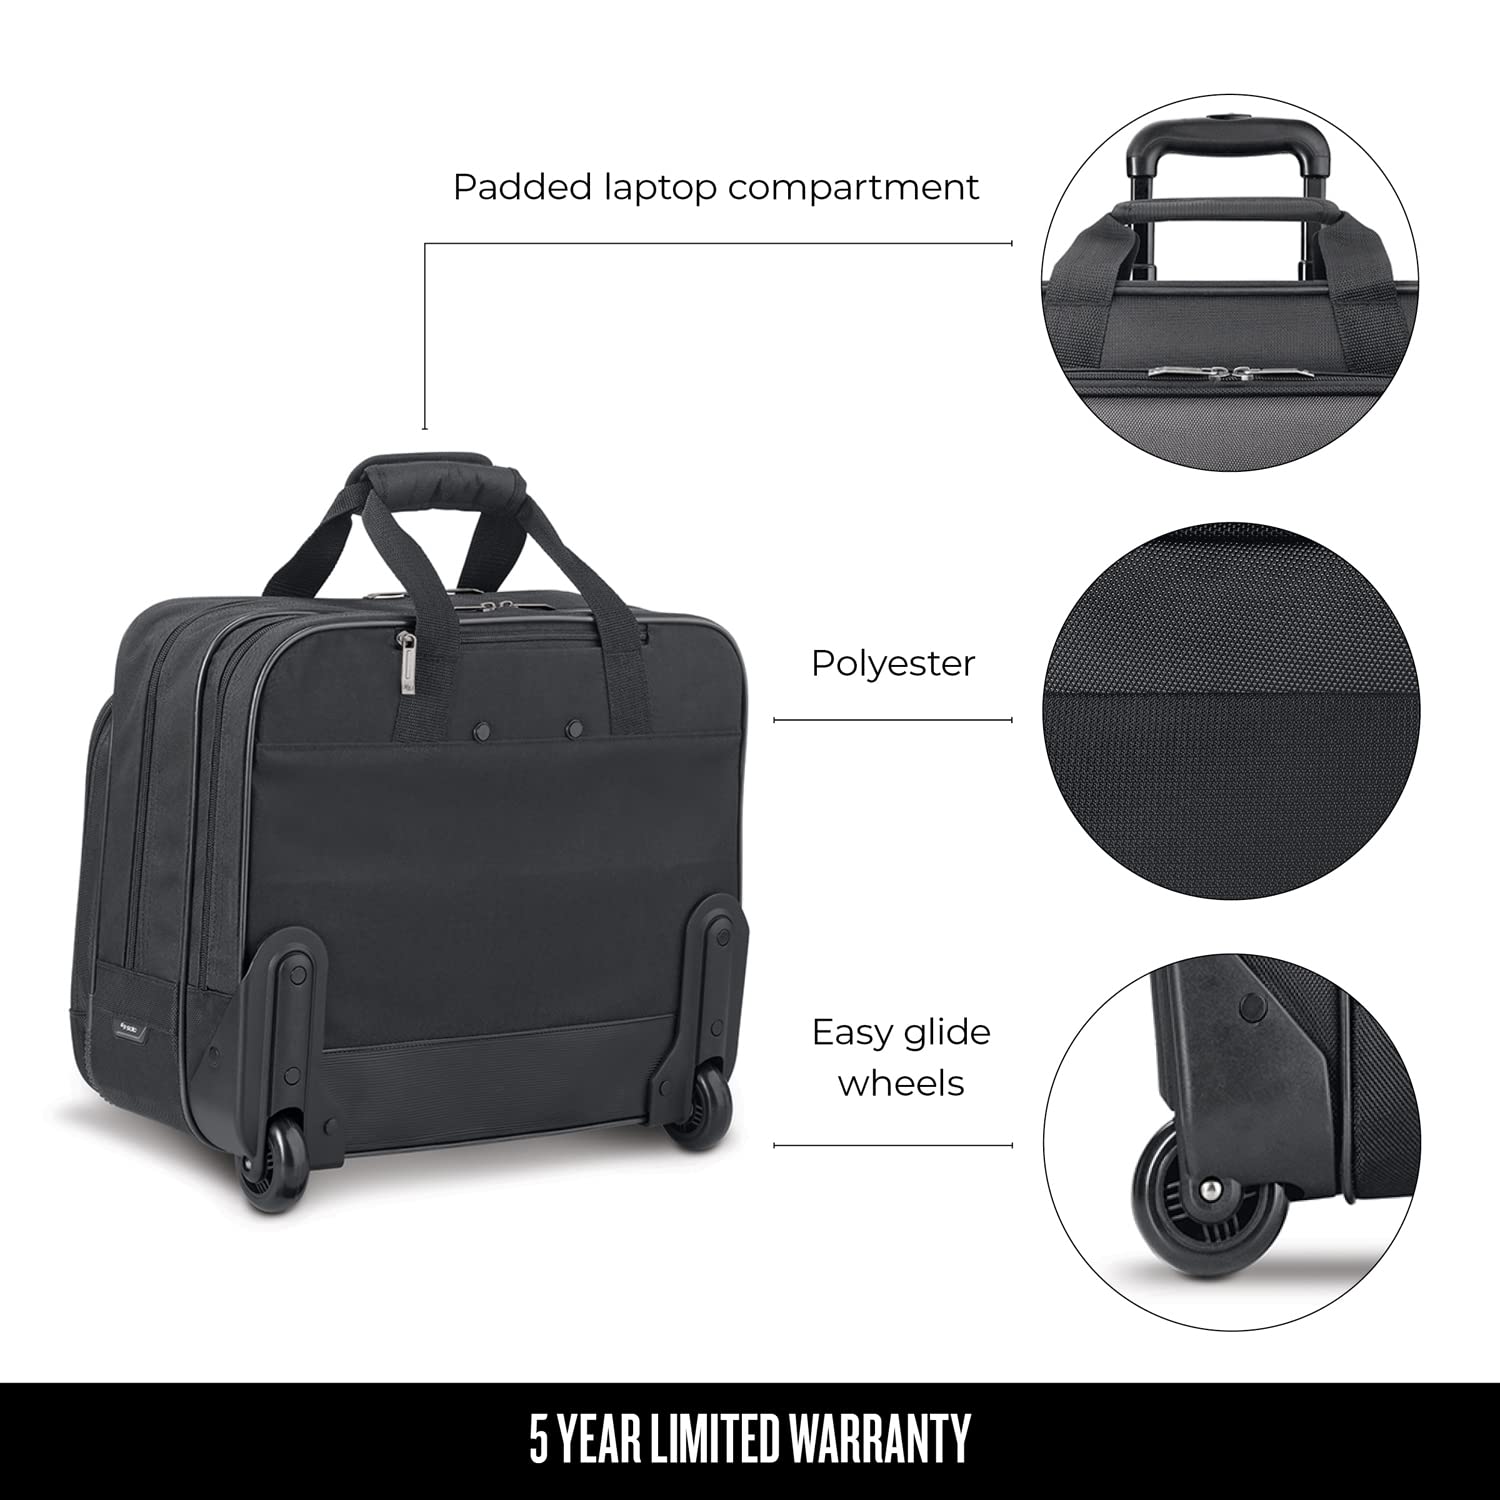 Solo New York Empire Rolling Laptop Bag. Rolling Briefcase for Women and Men. Fits Up to 17.3 Inch Laptop - Black, (CLS910-4)